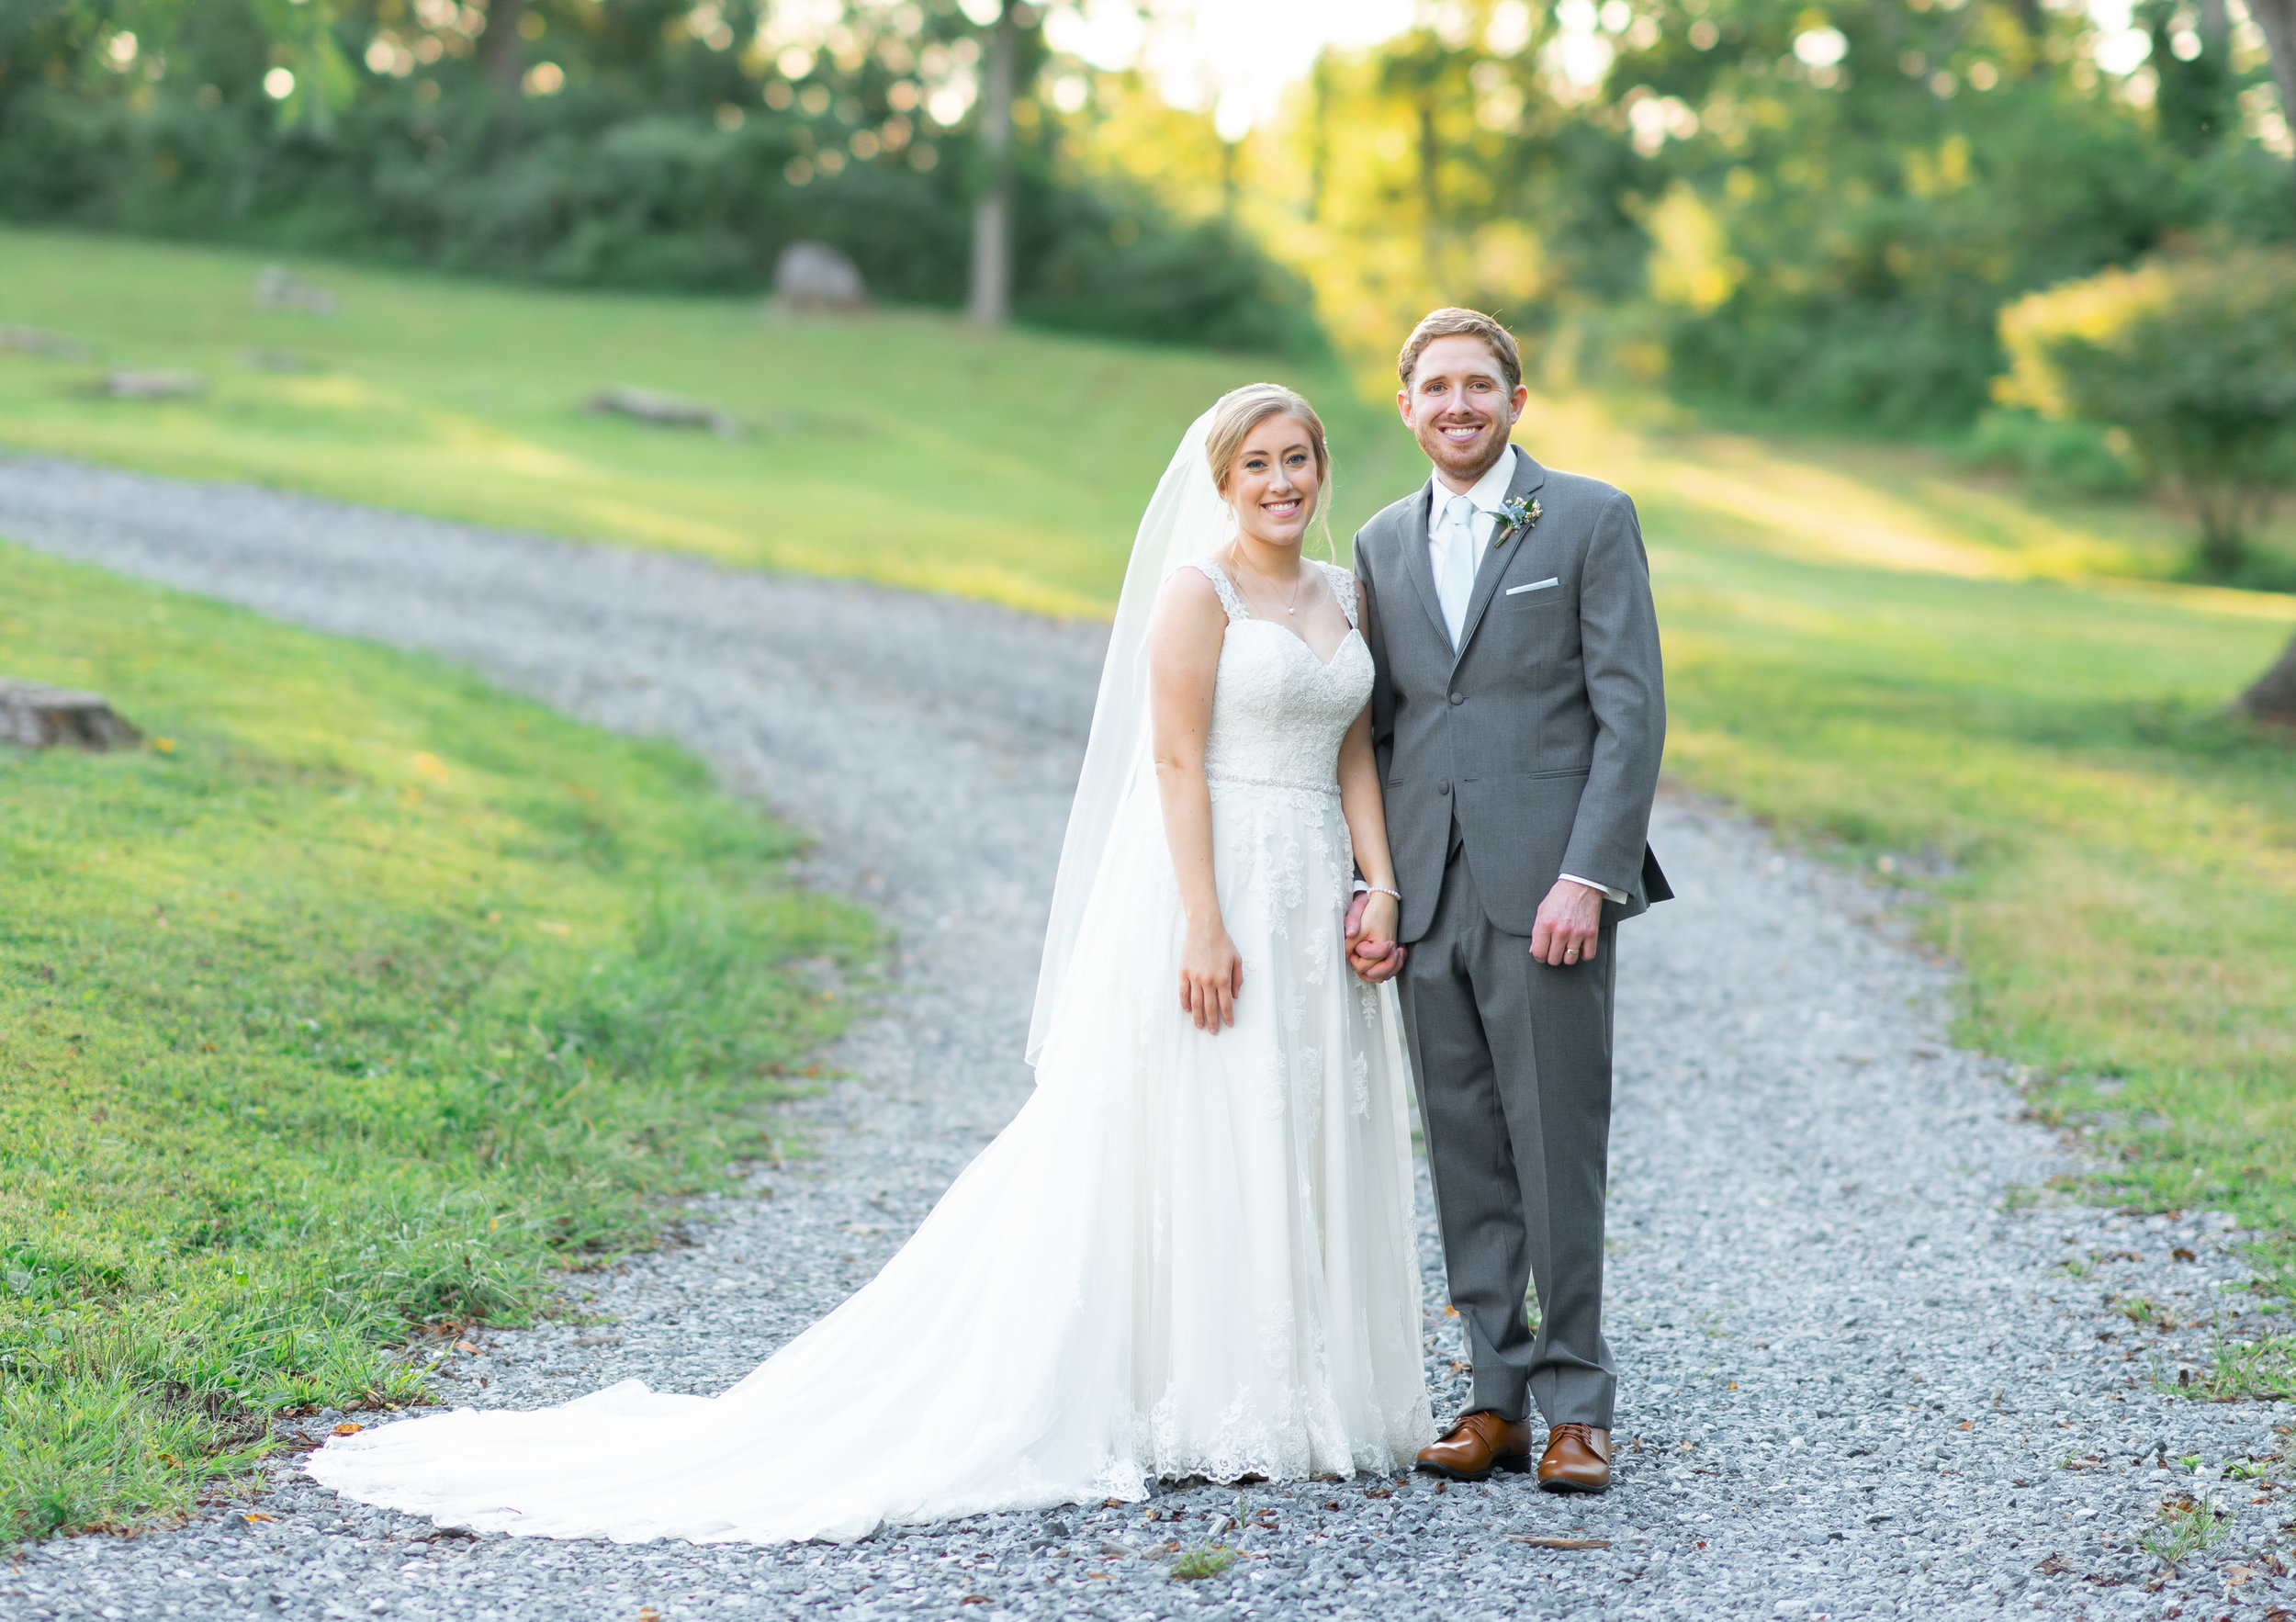 August wedding portraits at stone manor country club